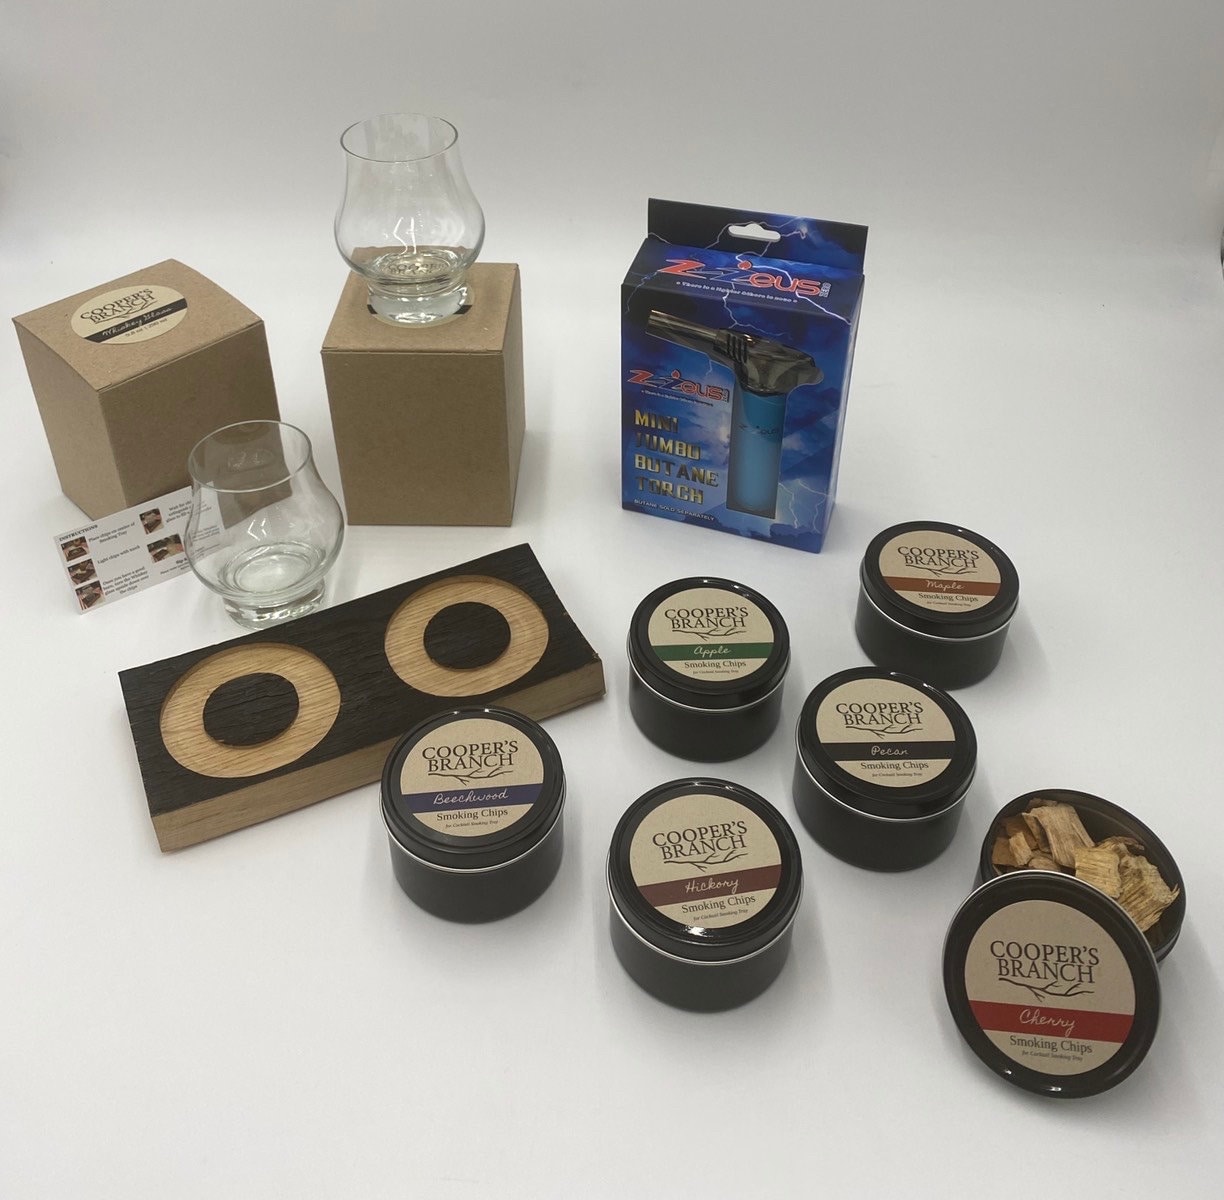 Smoked Cocktail Gift Set with Double Smoking Tray, Smoking Chips